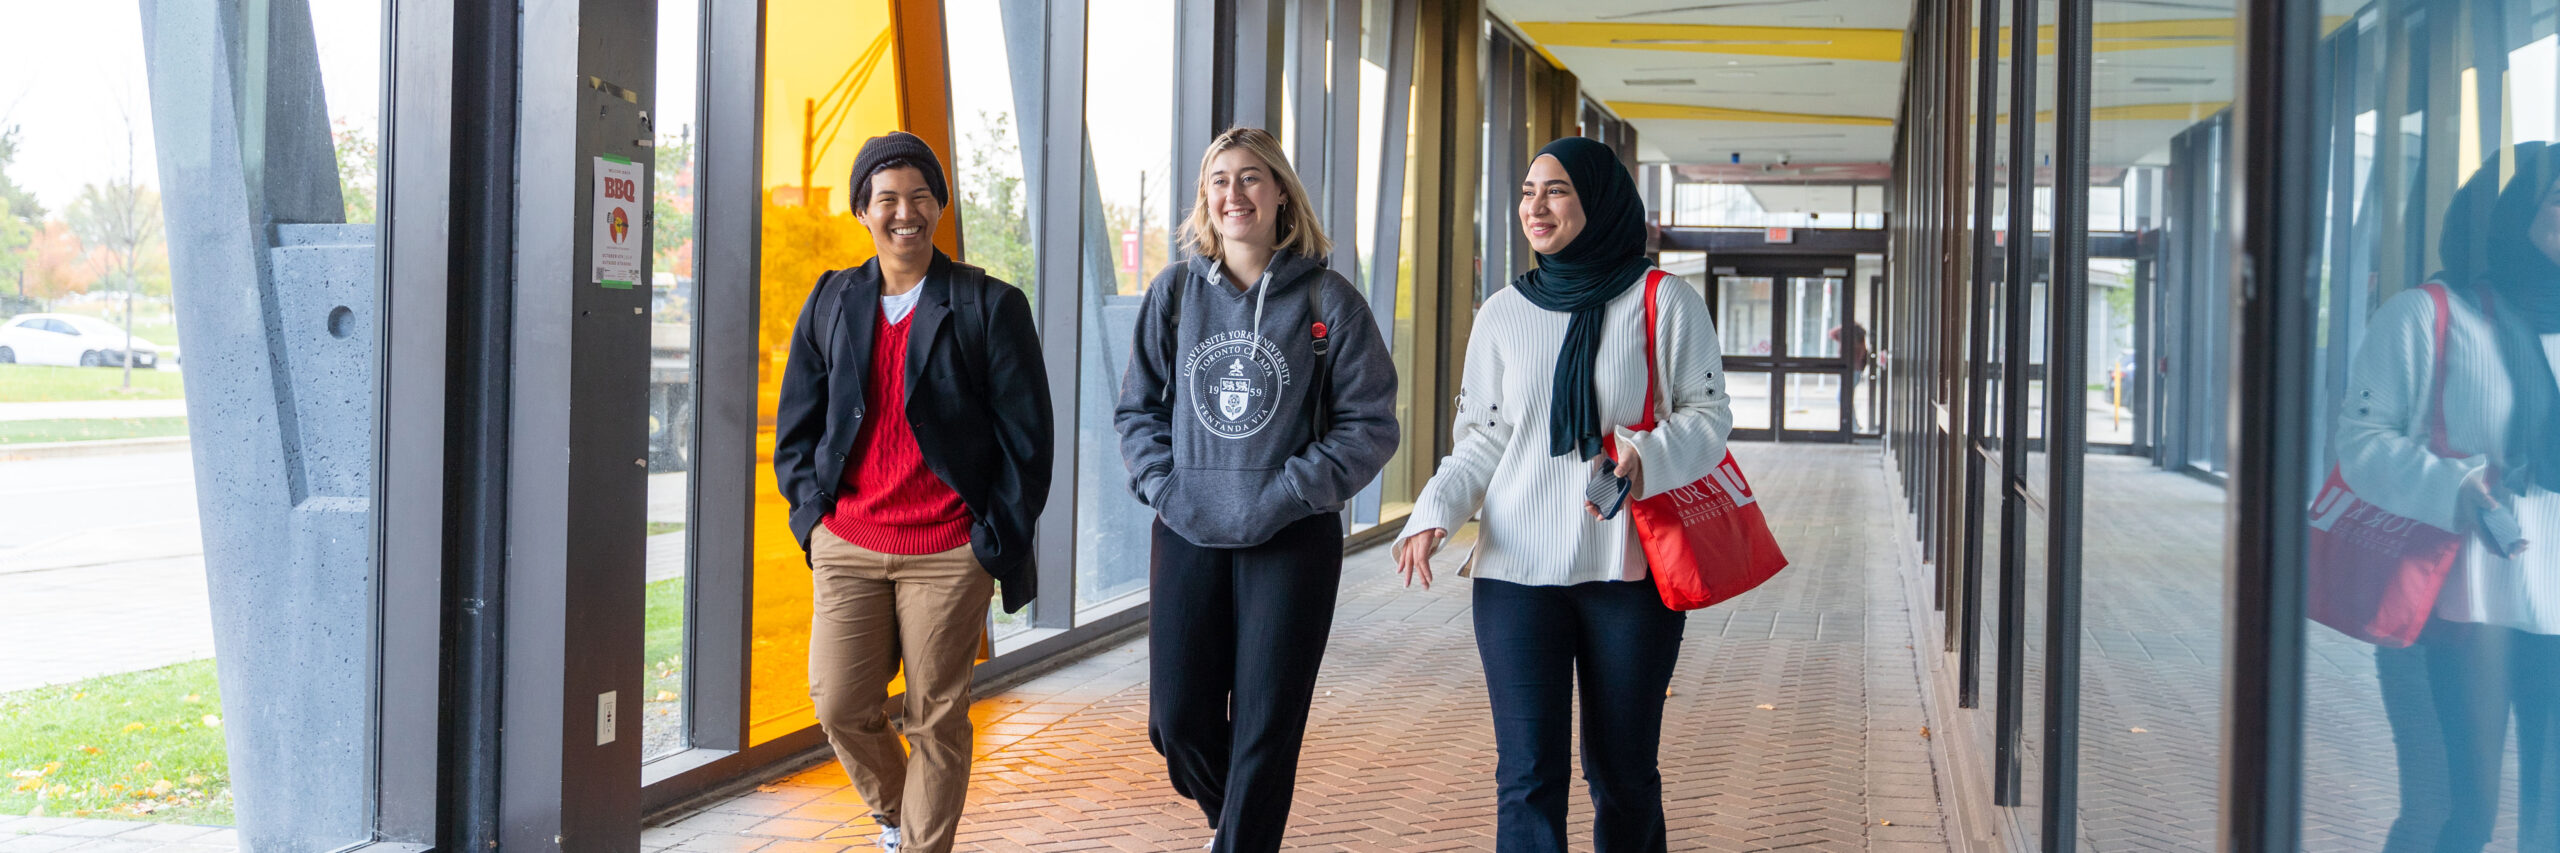 York students walking in Accolade Building on Keele Campus